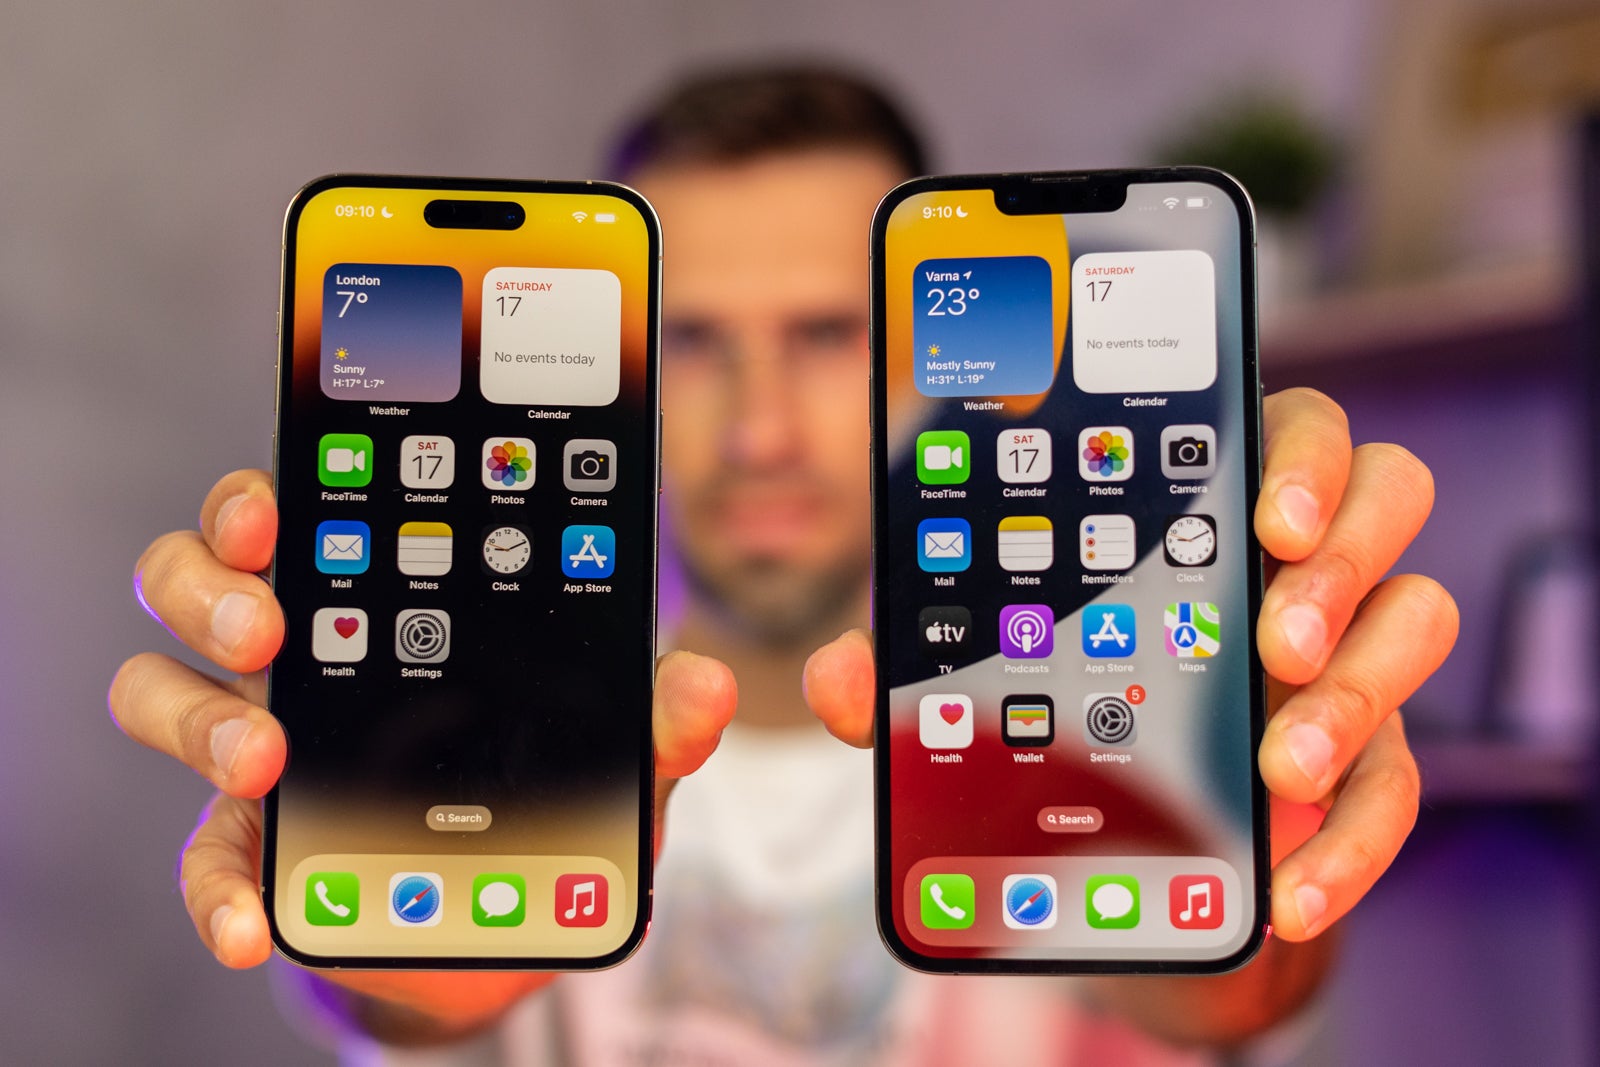 The iPhone 14 Pro Max with Dynamic Island and the iPhone 13 Pro Max with the notch - The iPhone 16 design won’t be anything new. Have we reached the “perfect” iPhone look?